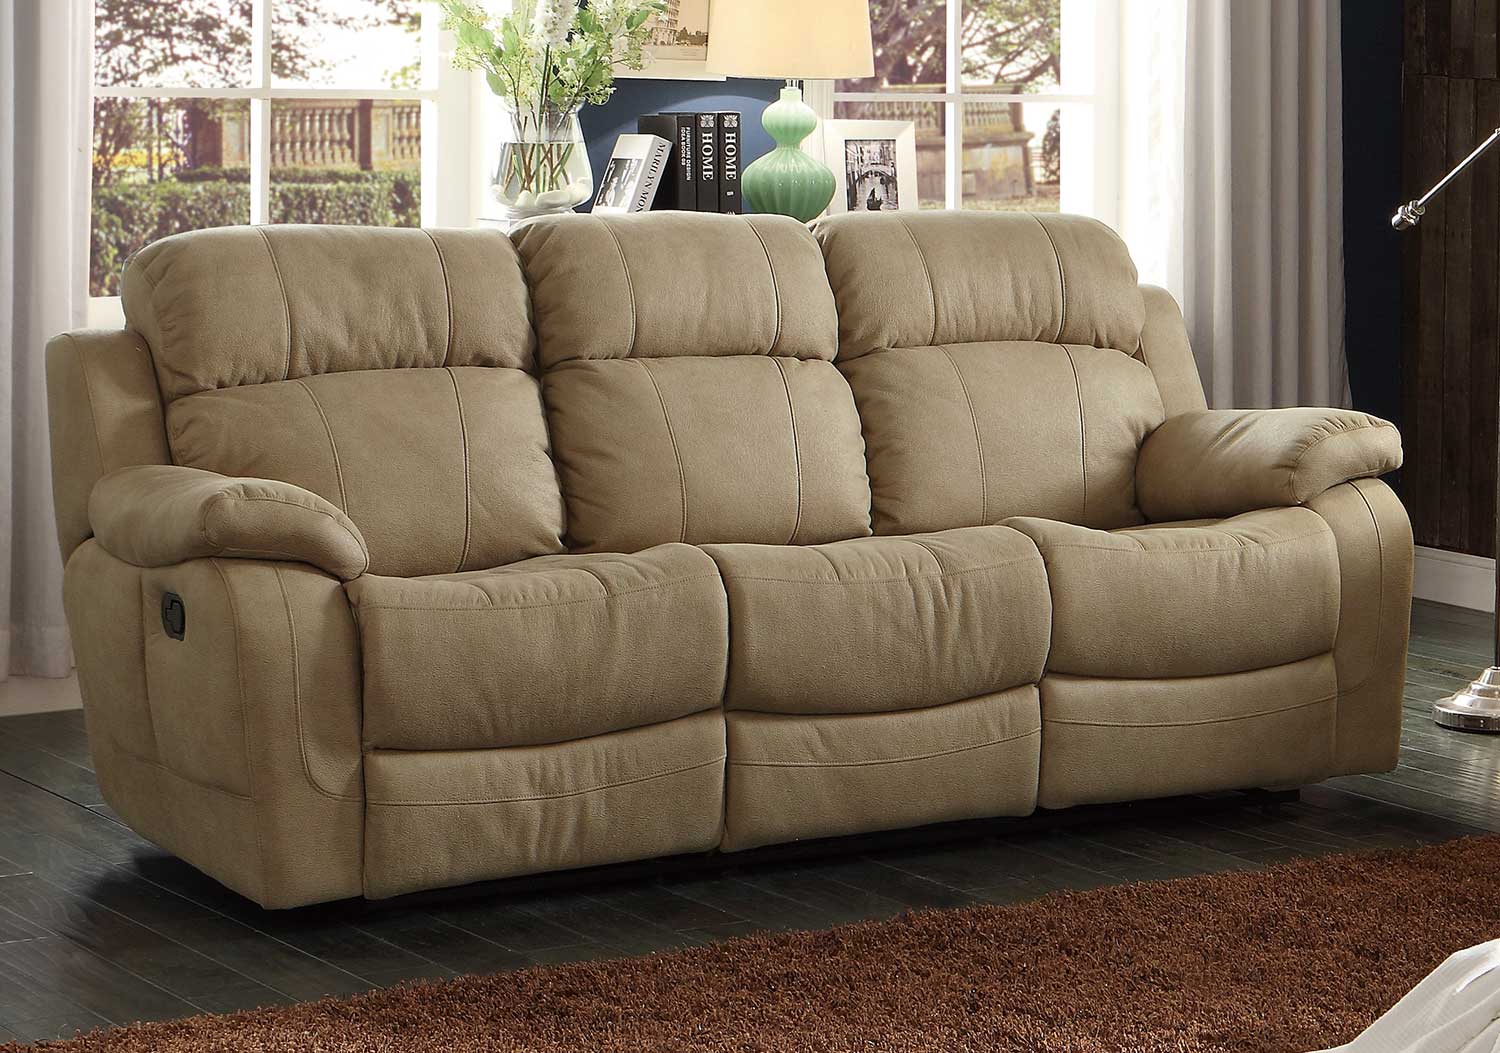 Homelegance Marille Double Reclining Sofa with Center Drop-Down Cup Holders - Taupe